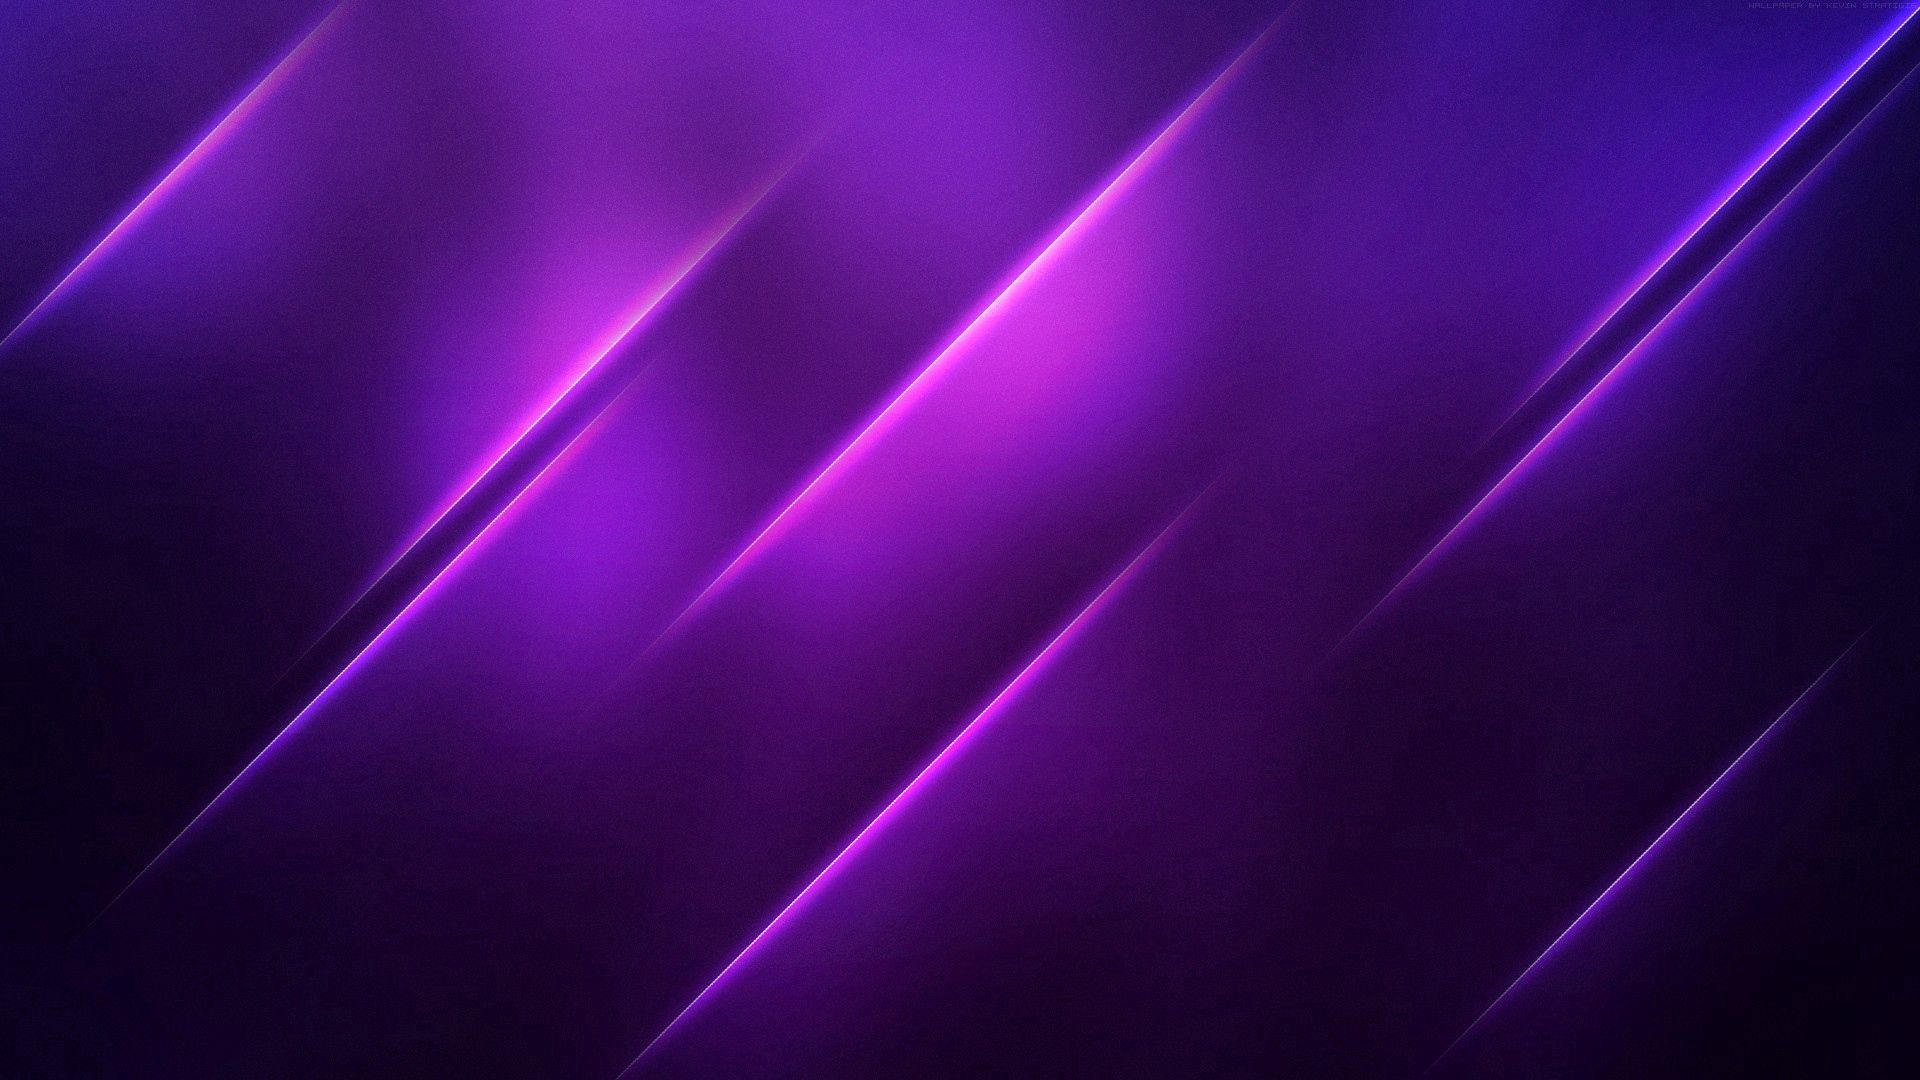 113714 Screensavers and Wallpapers Obliquely for phone. Download obliquely, abstract, violet, bright, lines, purple pictures for free